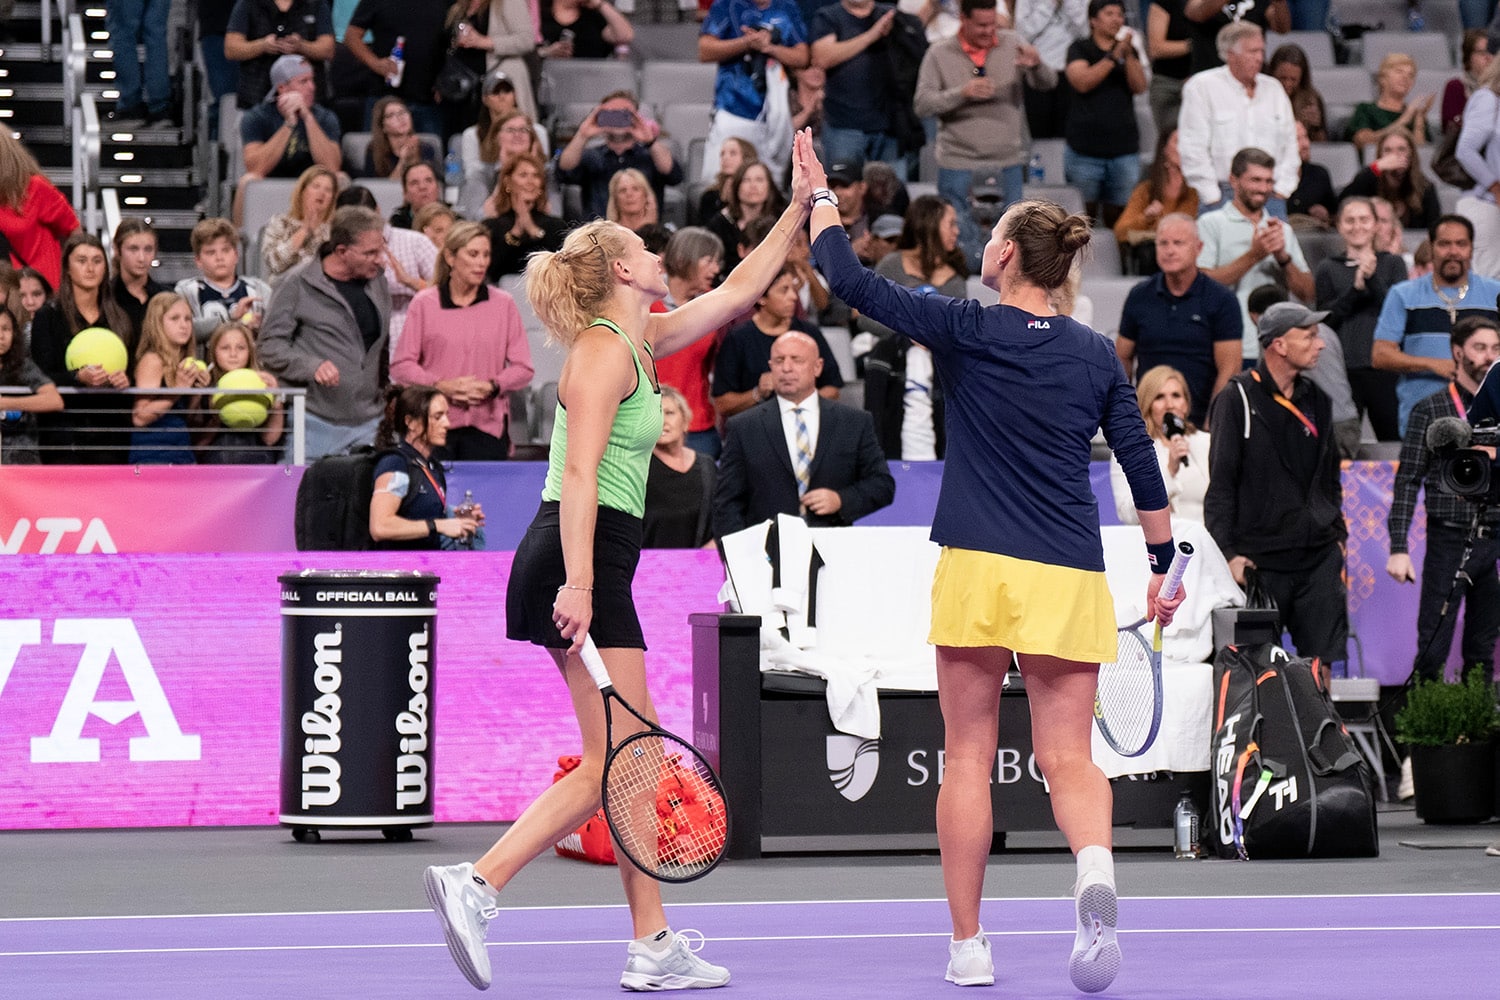 Two WTA players celebrate their doubles win with a high-five.